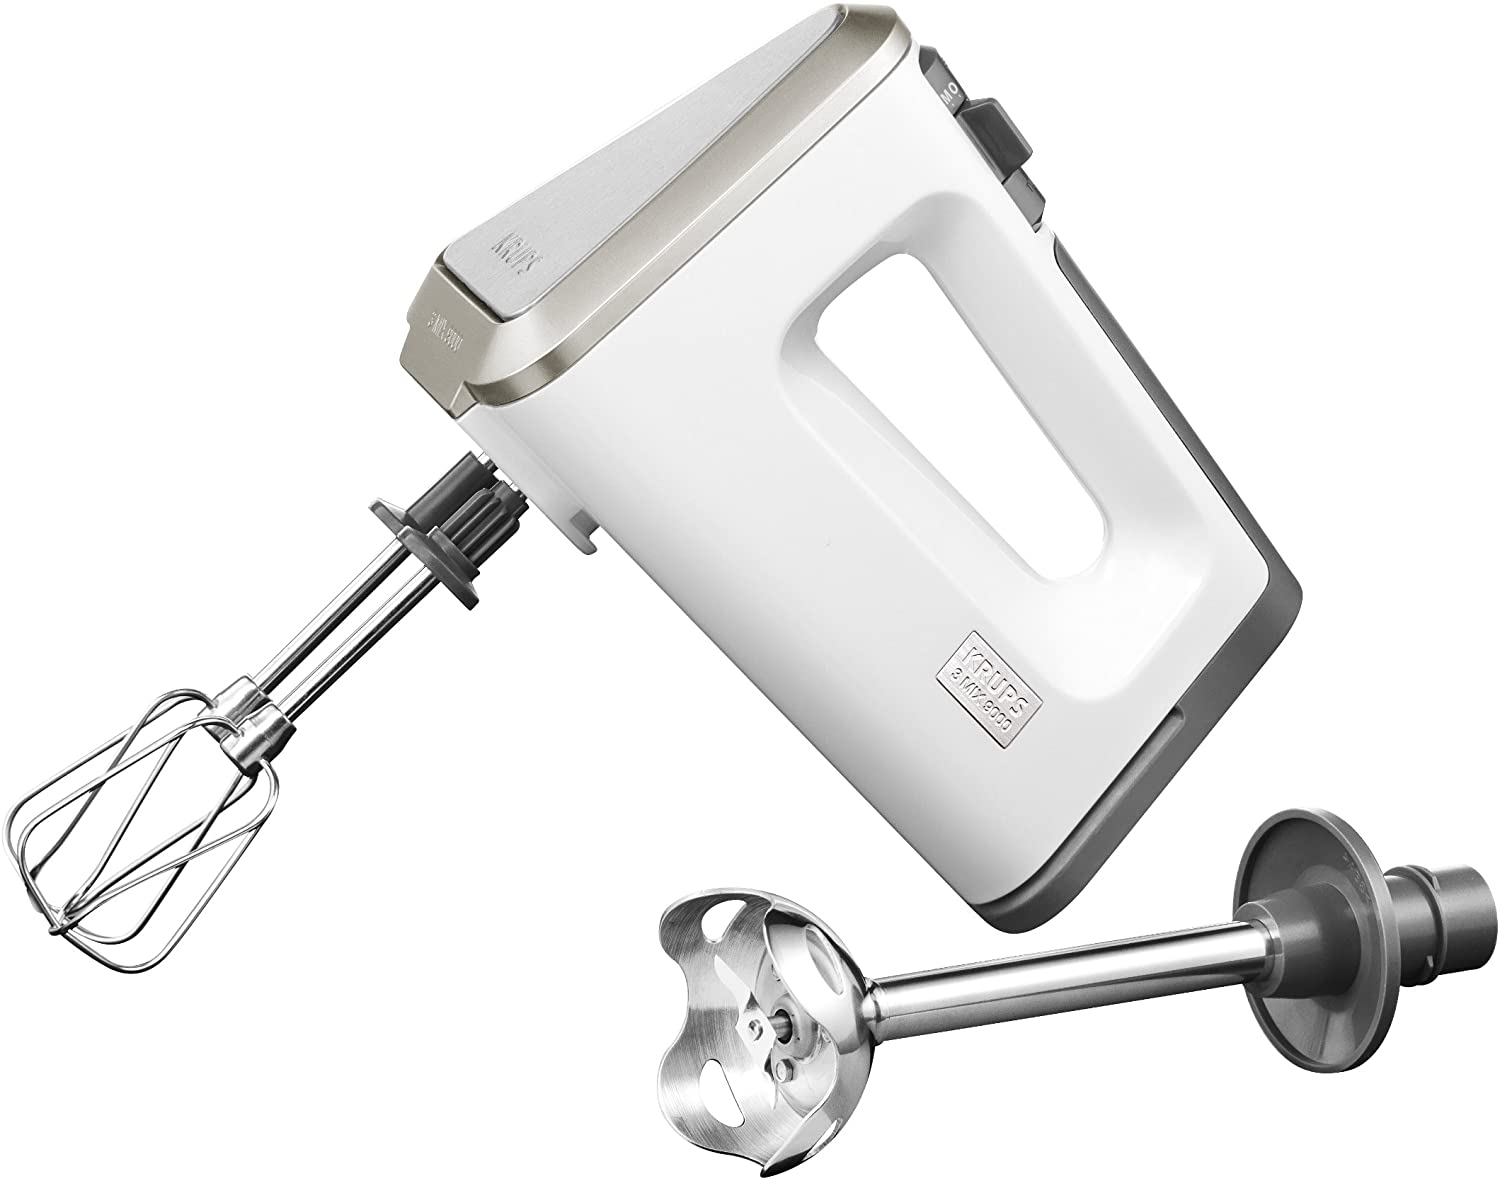 KRUPS GN 9031 Hand Mixer 3 Mix 9000 Deluxe Set - Whisk Rods, Blender Rod (500 W with Turbo Function), Dough Hooks & Mixing Cup, White / Grey, Single, White